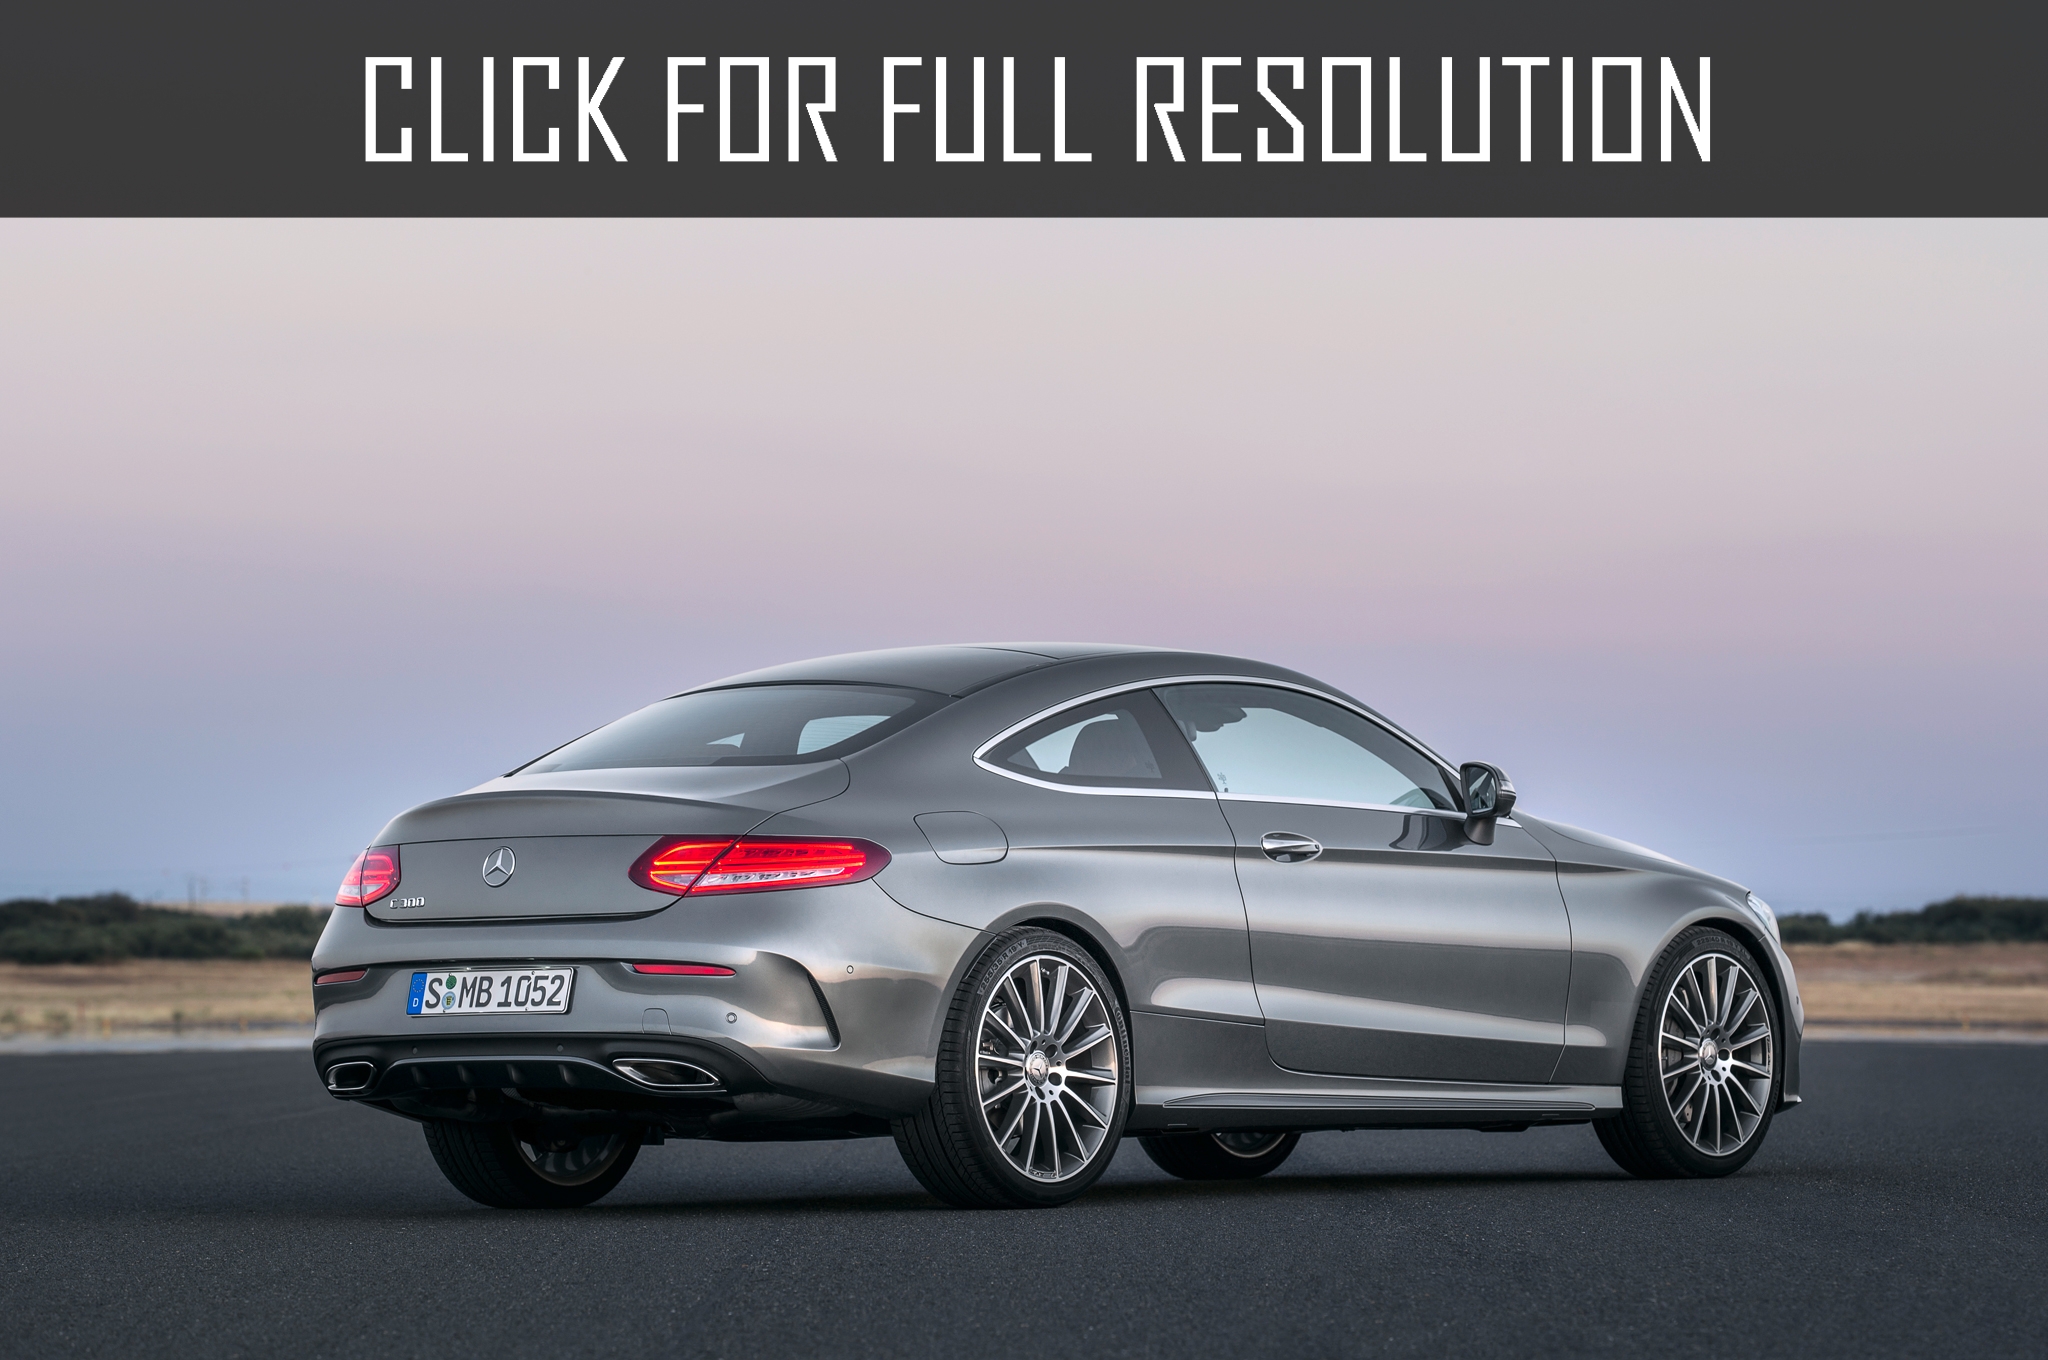 2017 Mercedes Benz S Class Coupe